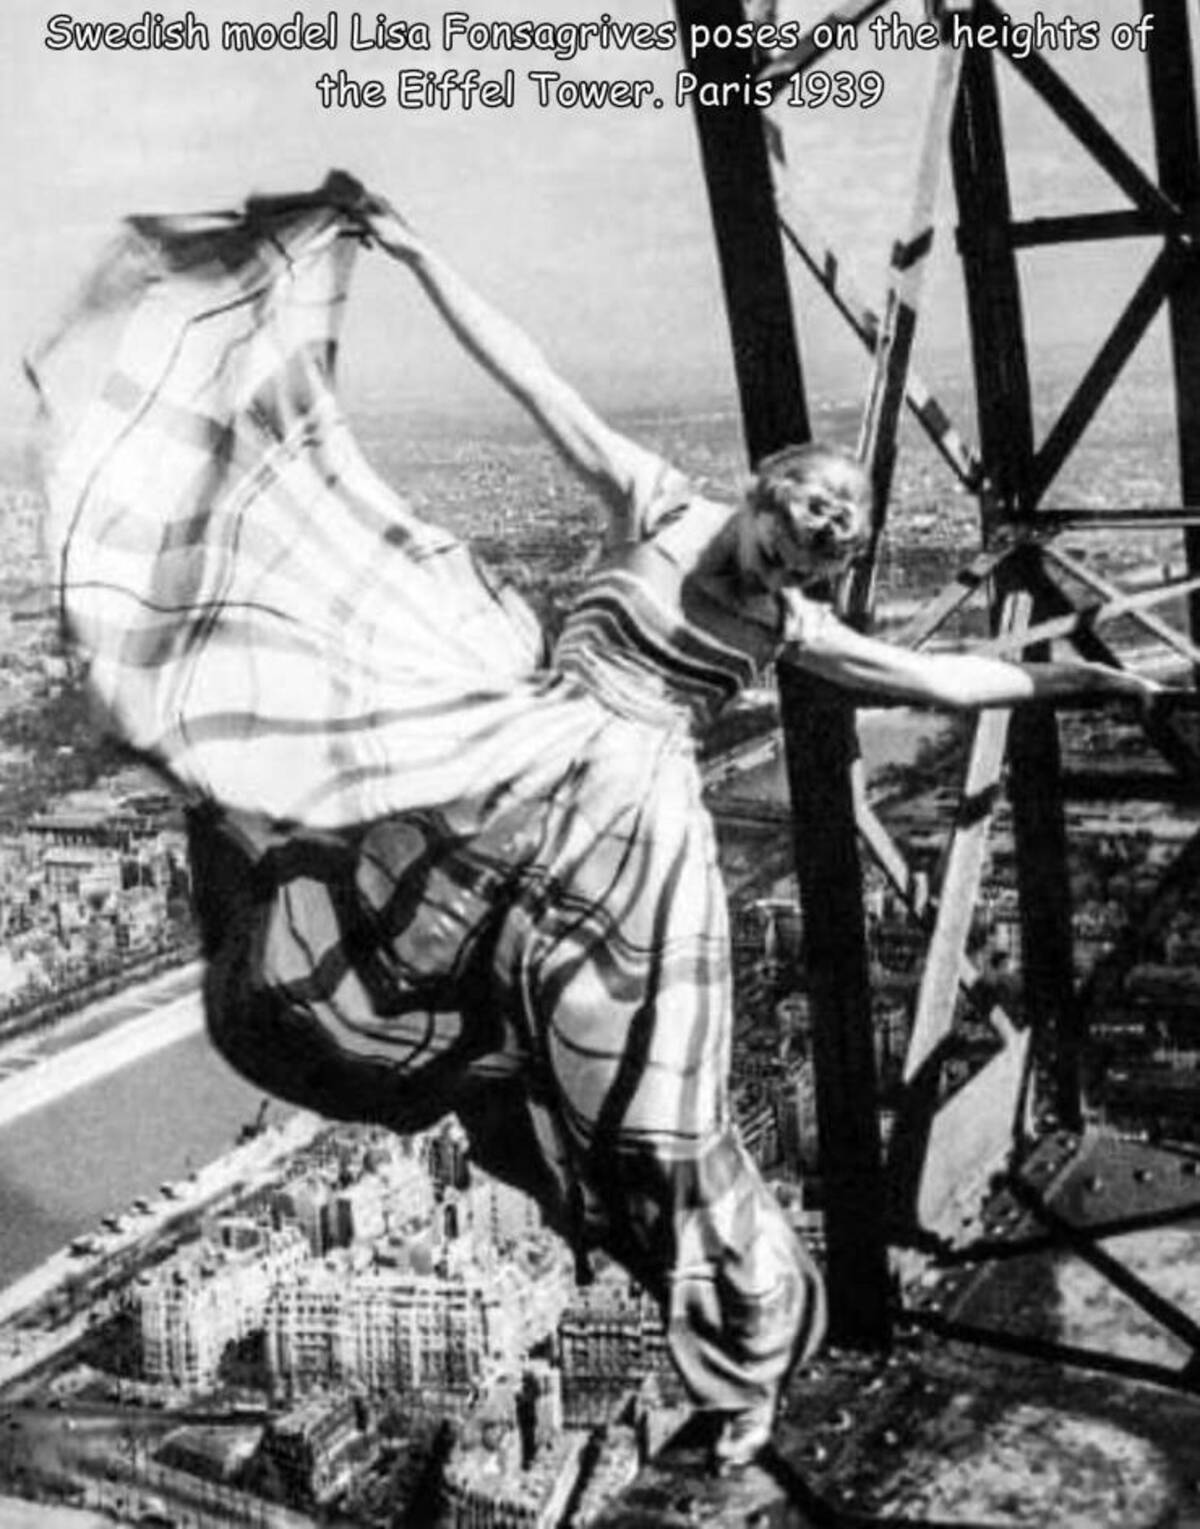 eiffel tower - Swedish model Lisa Fonsagrives poses on the heights of the Eiffel Tower. Paris 1939